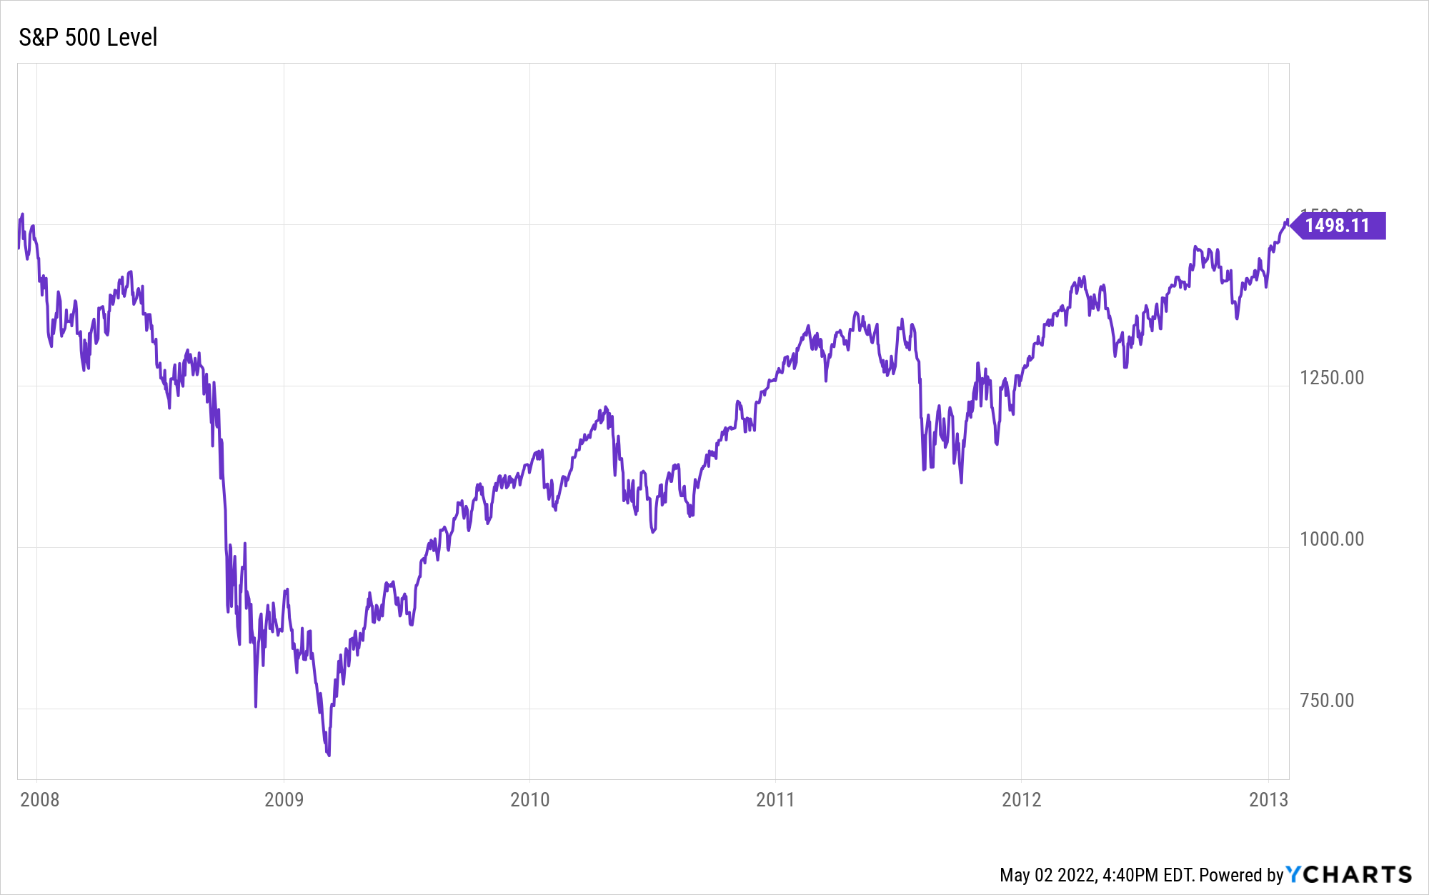 A chart showing the levels of the S&P 500 from 2008 to 2013.